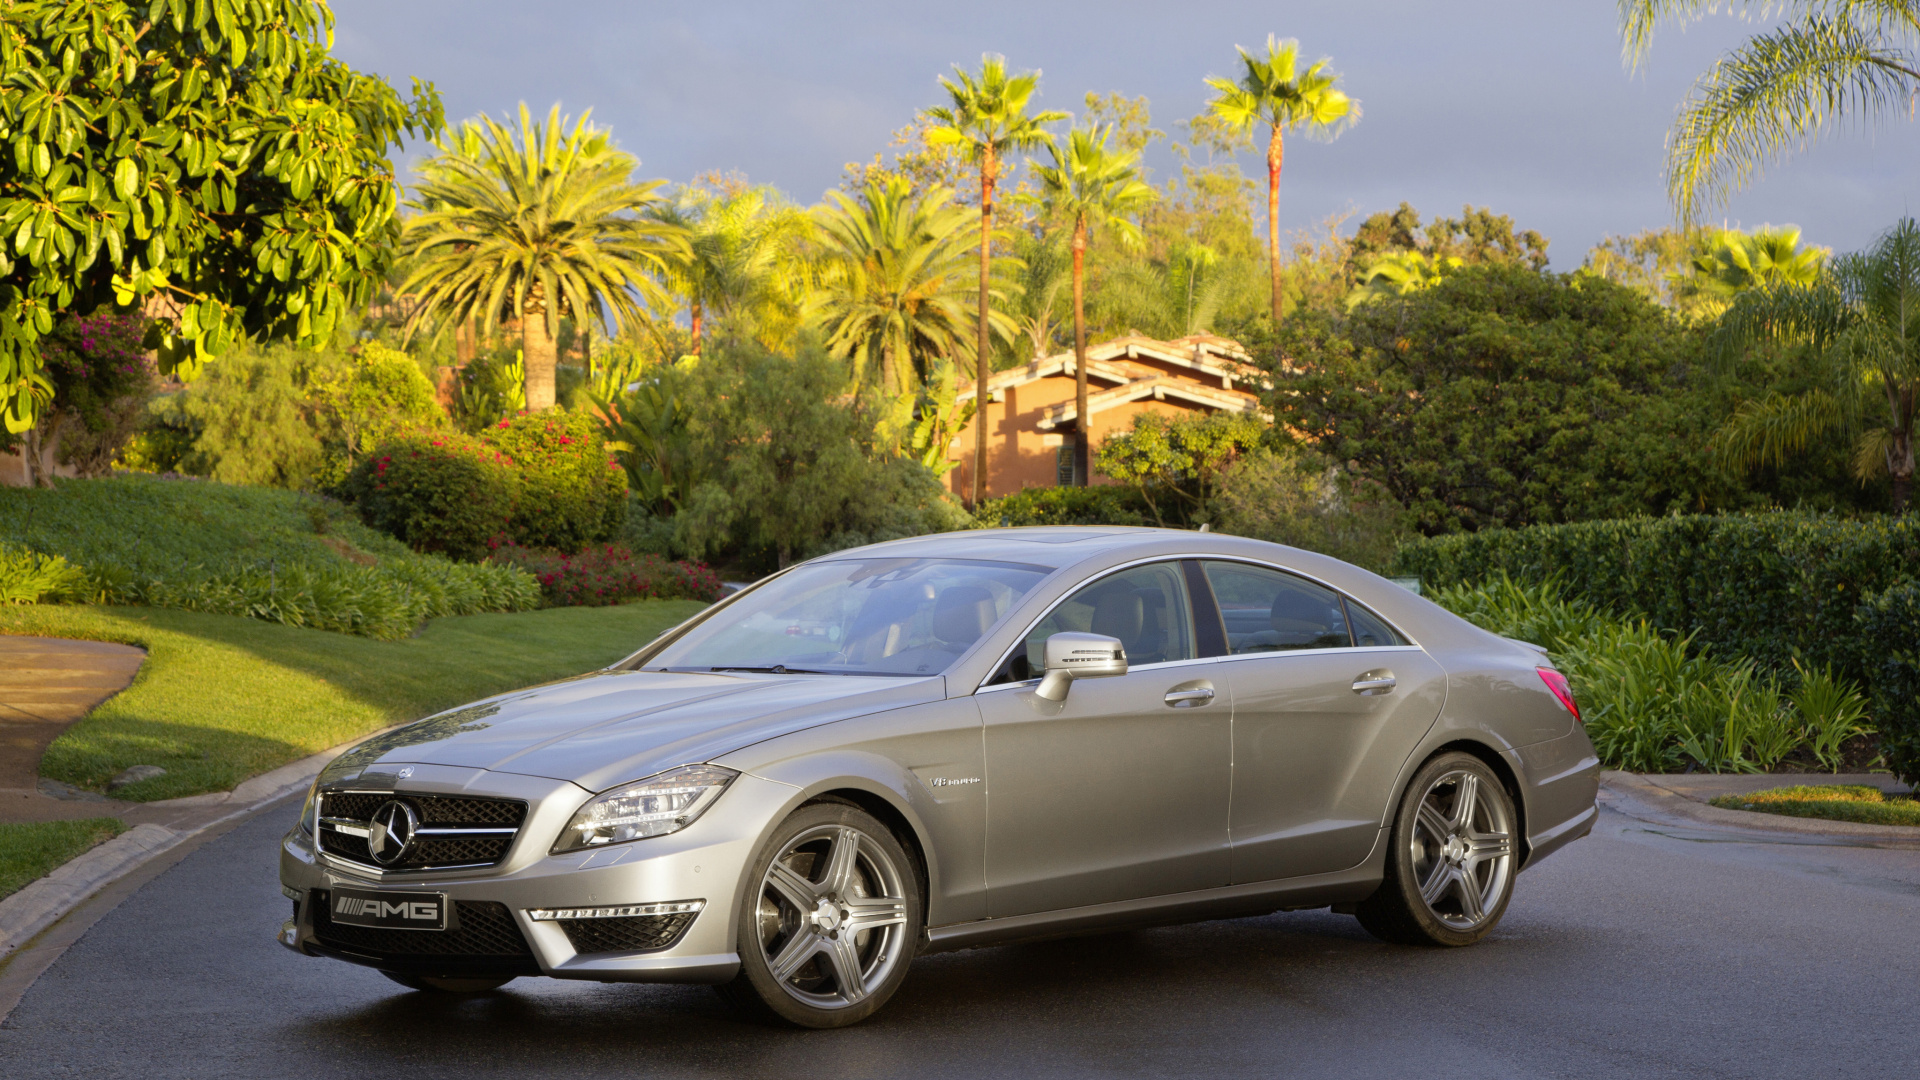 Gray Mercedes Benz Coupe on Road During Daytime. Wallpaper in 1920x1080 Resolution